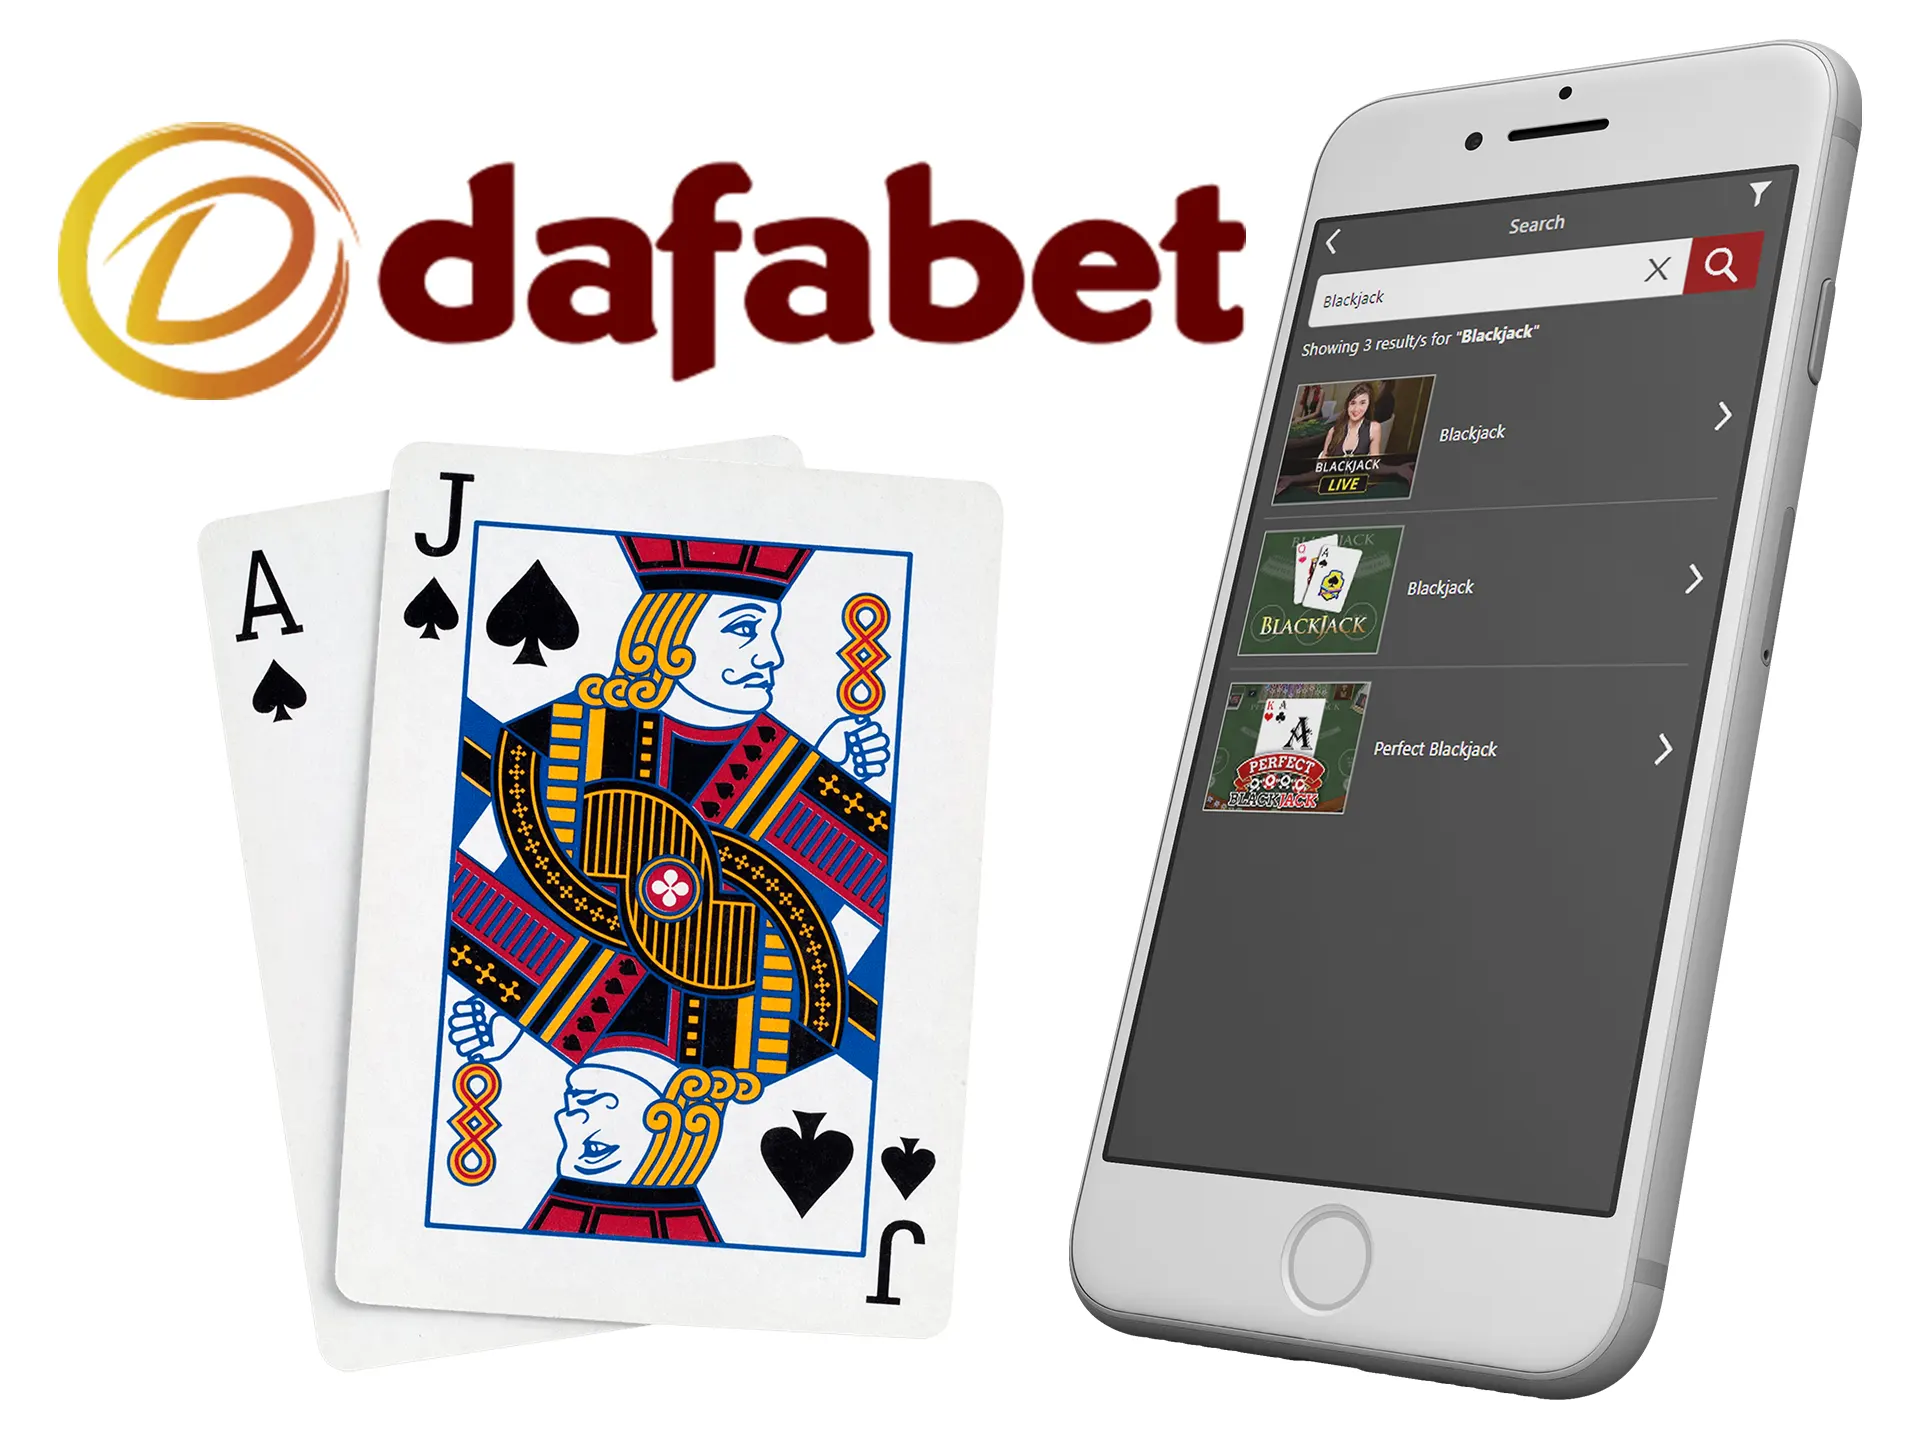 Play blackjack with real peoples at Dafabet casino.